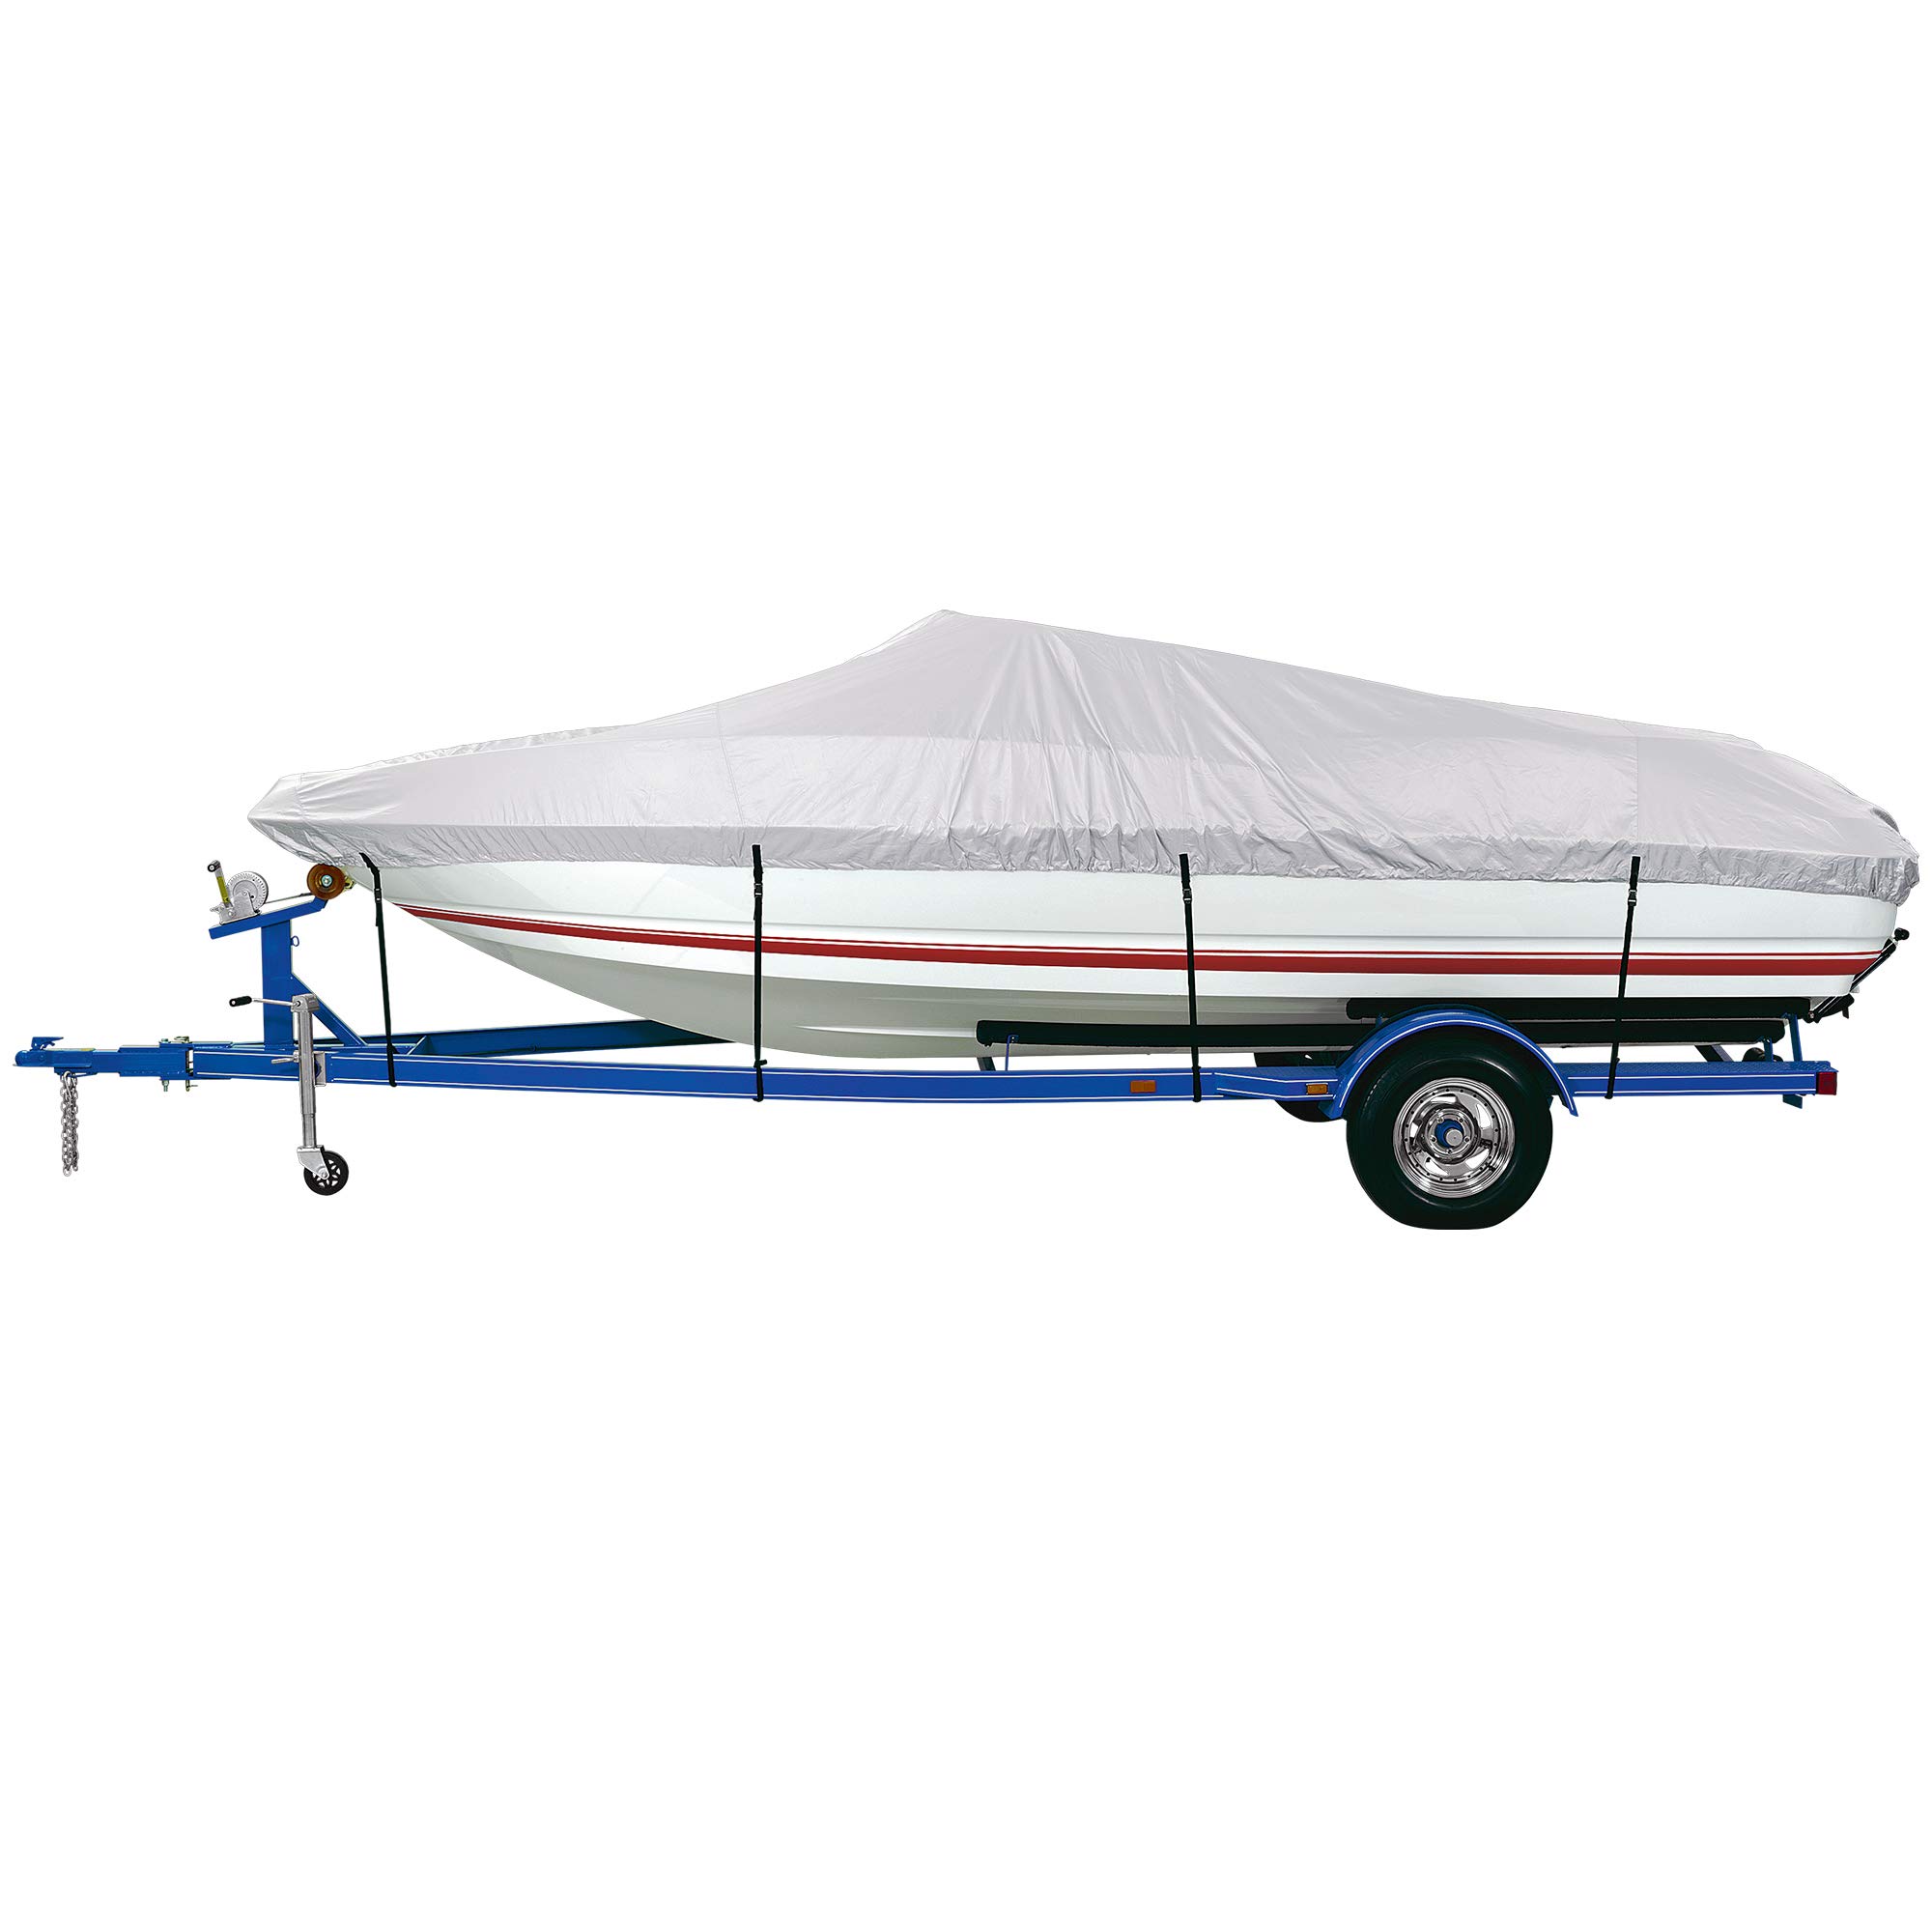 iCOVER Trailerable Boat Cover- 20'-23' Waterproof Heavy Duty Marine Grade  Polyester, Fits V-Hull,Fish&Ski,Pro-Style,Fishing Boat,Runabout,Bass Boat,  up to 20ft-23ft Long X 100 Wide 150D silver E:20'-23' Long,Beam Width up